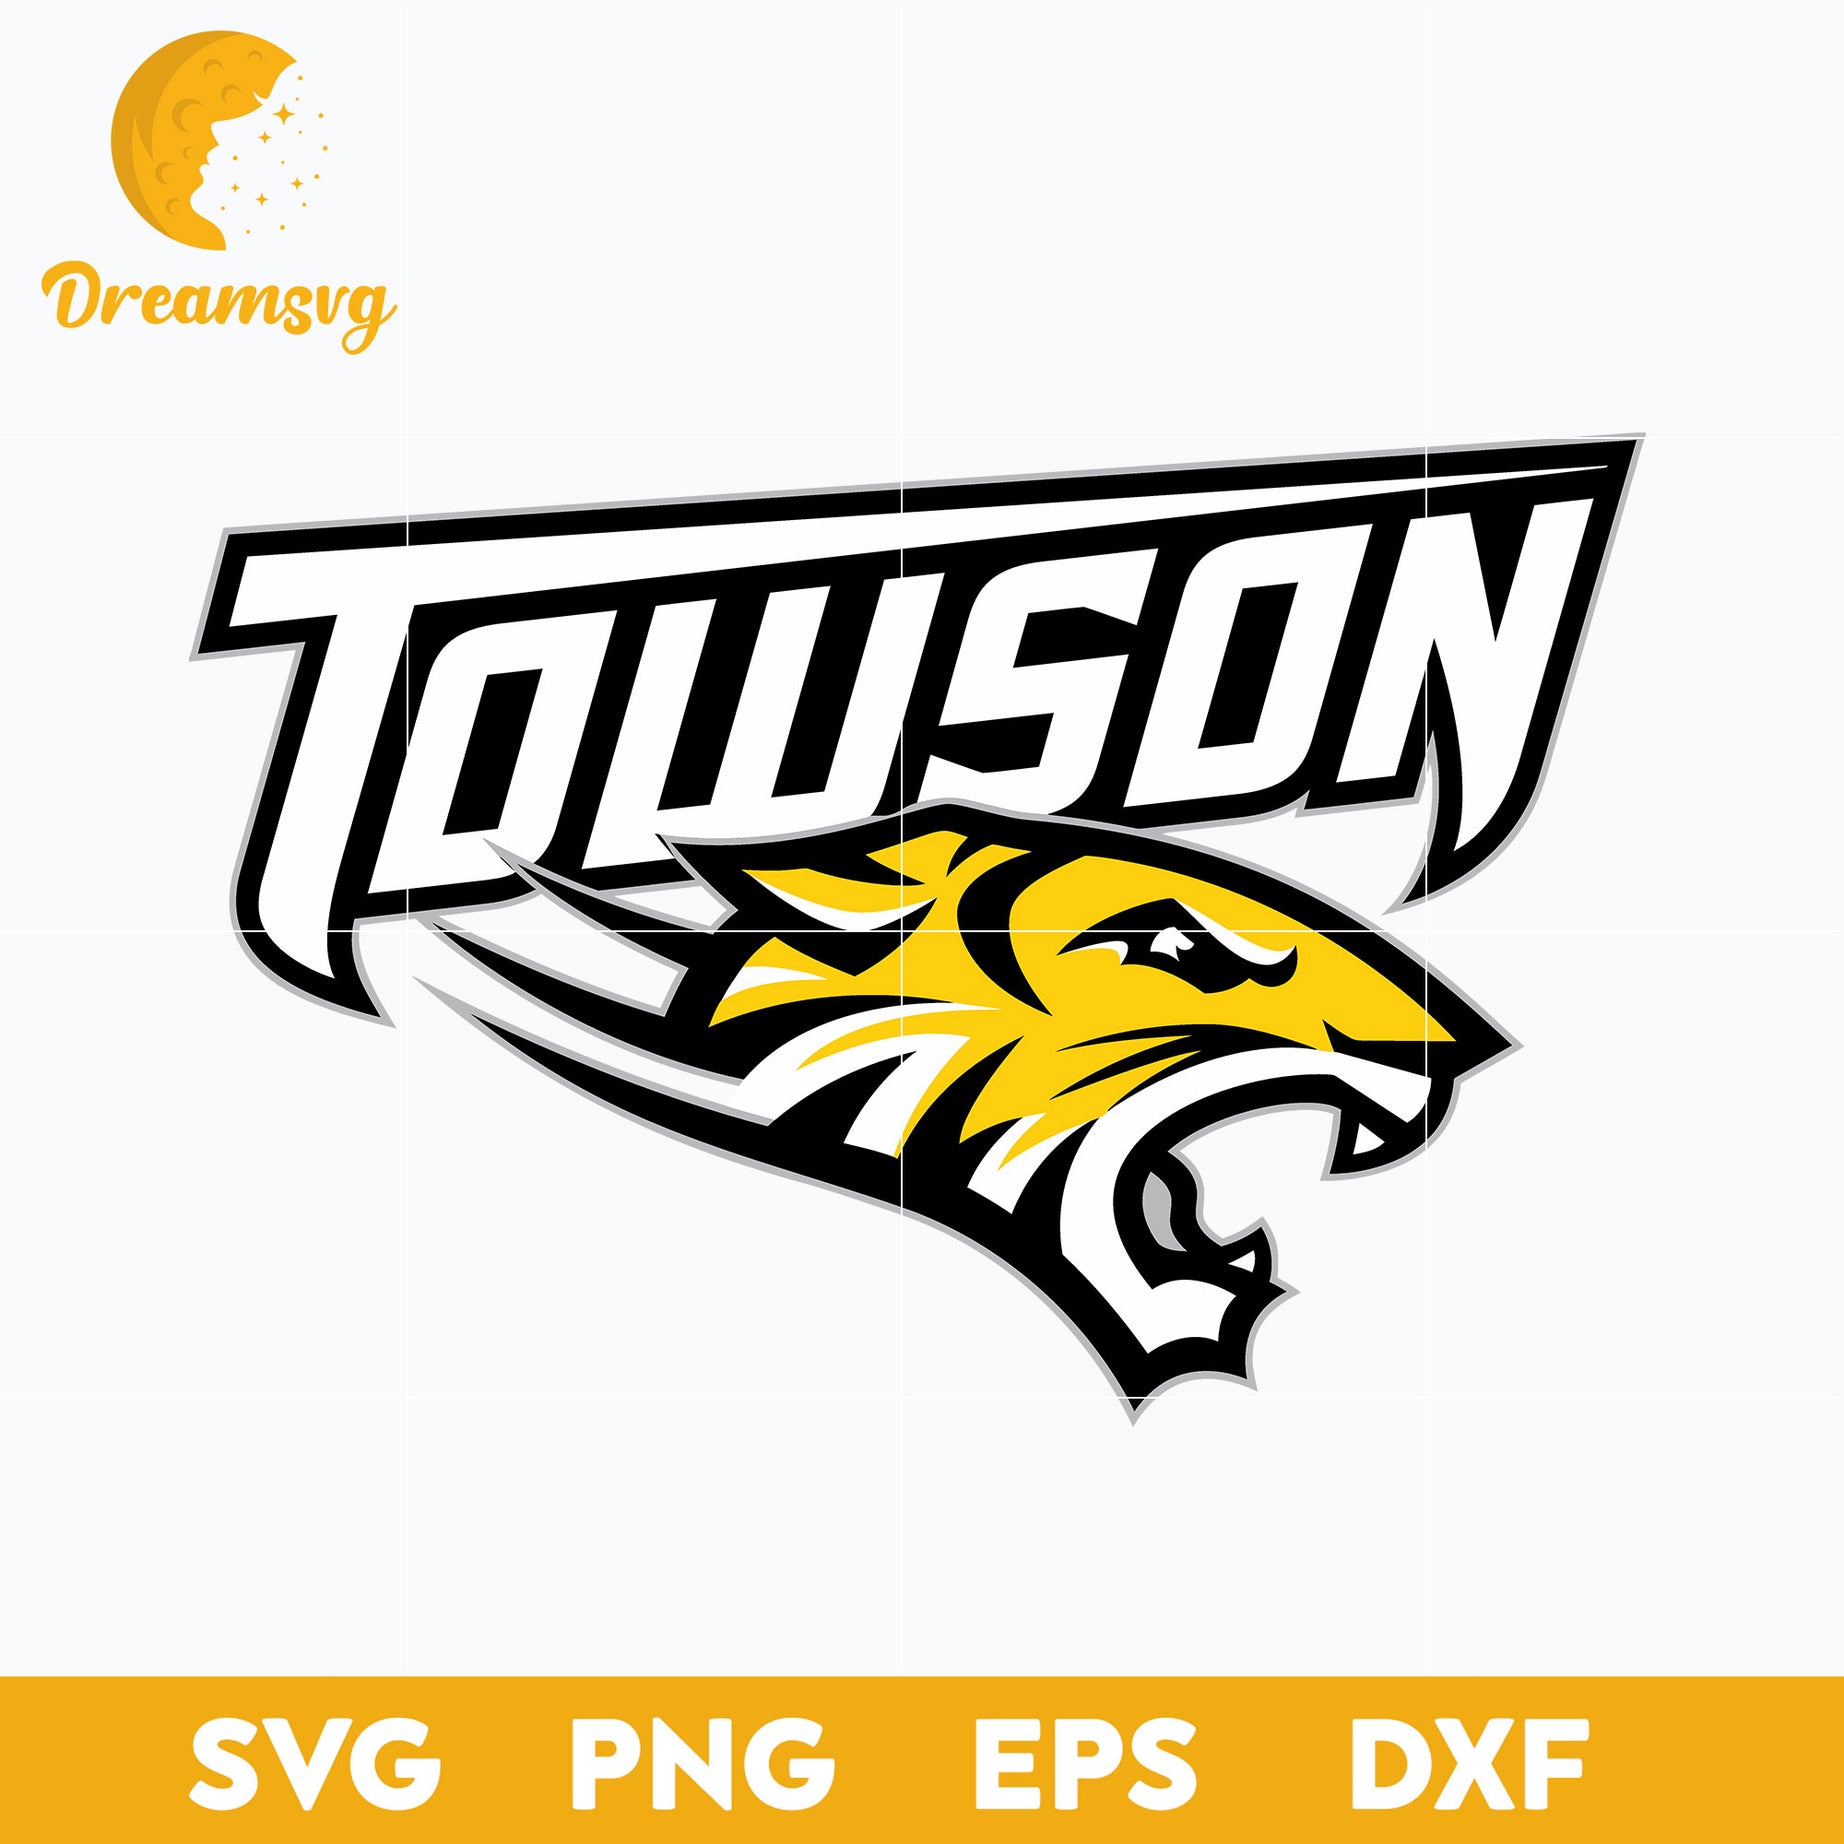 Towson Tigers Svg, Logo Ncaa Sport Svg, Ncaa Svg, Png, Dxf, Eps Download File.